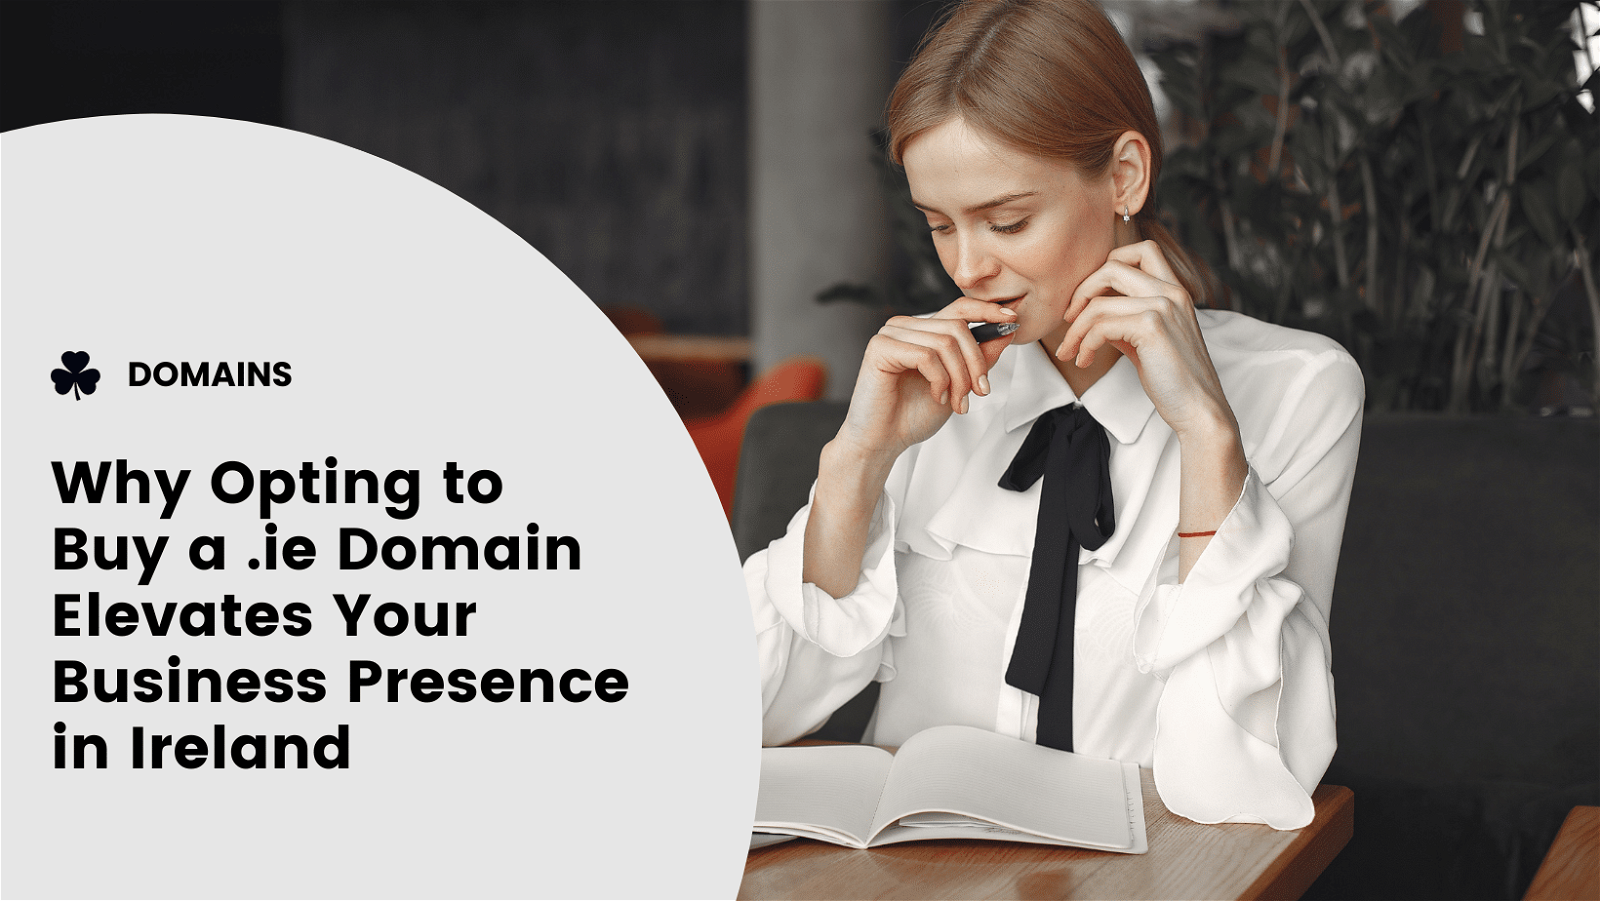 Optimize your business presence in Ireland with a j domain buy.